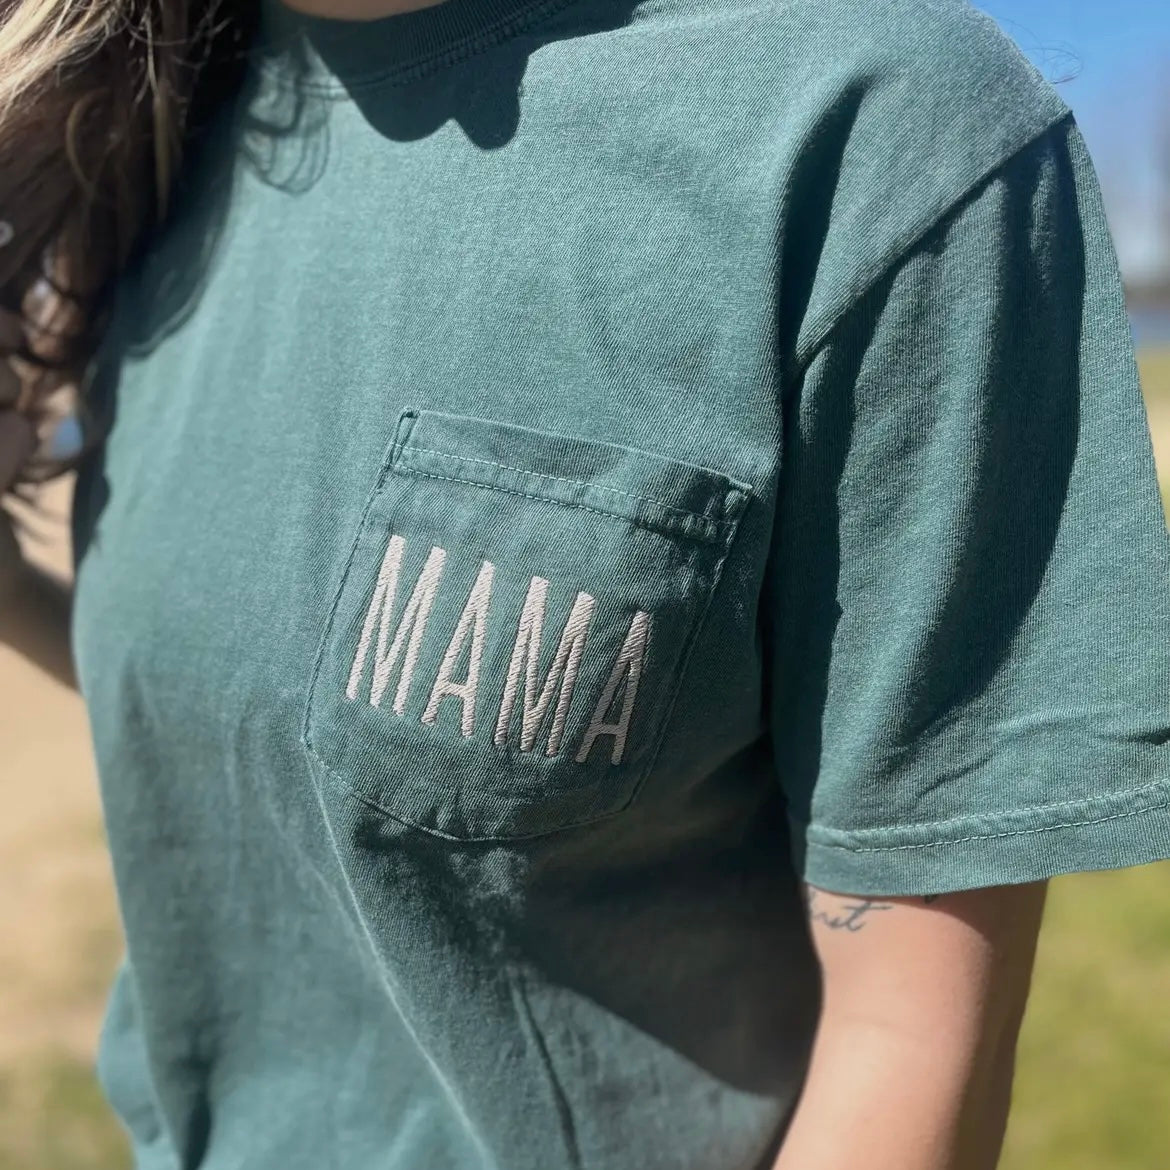 Mama Embroidered Comfort Colors Pocket Tee